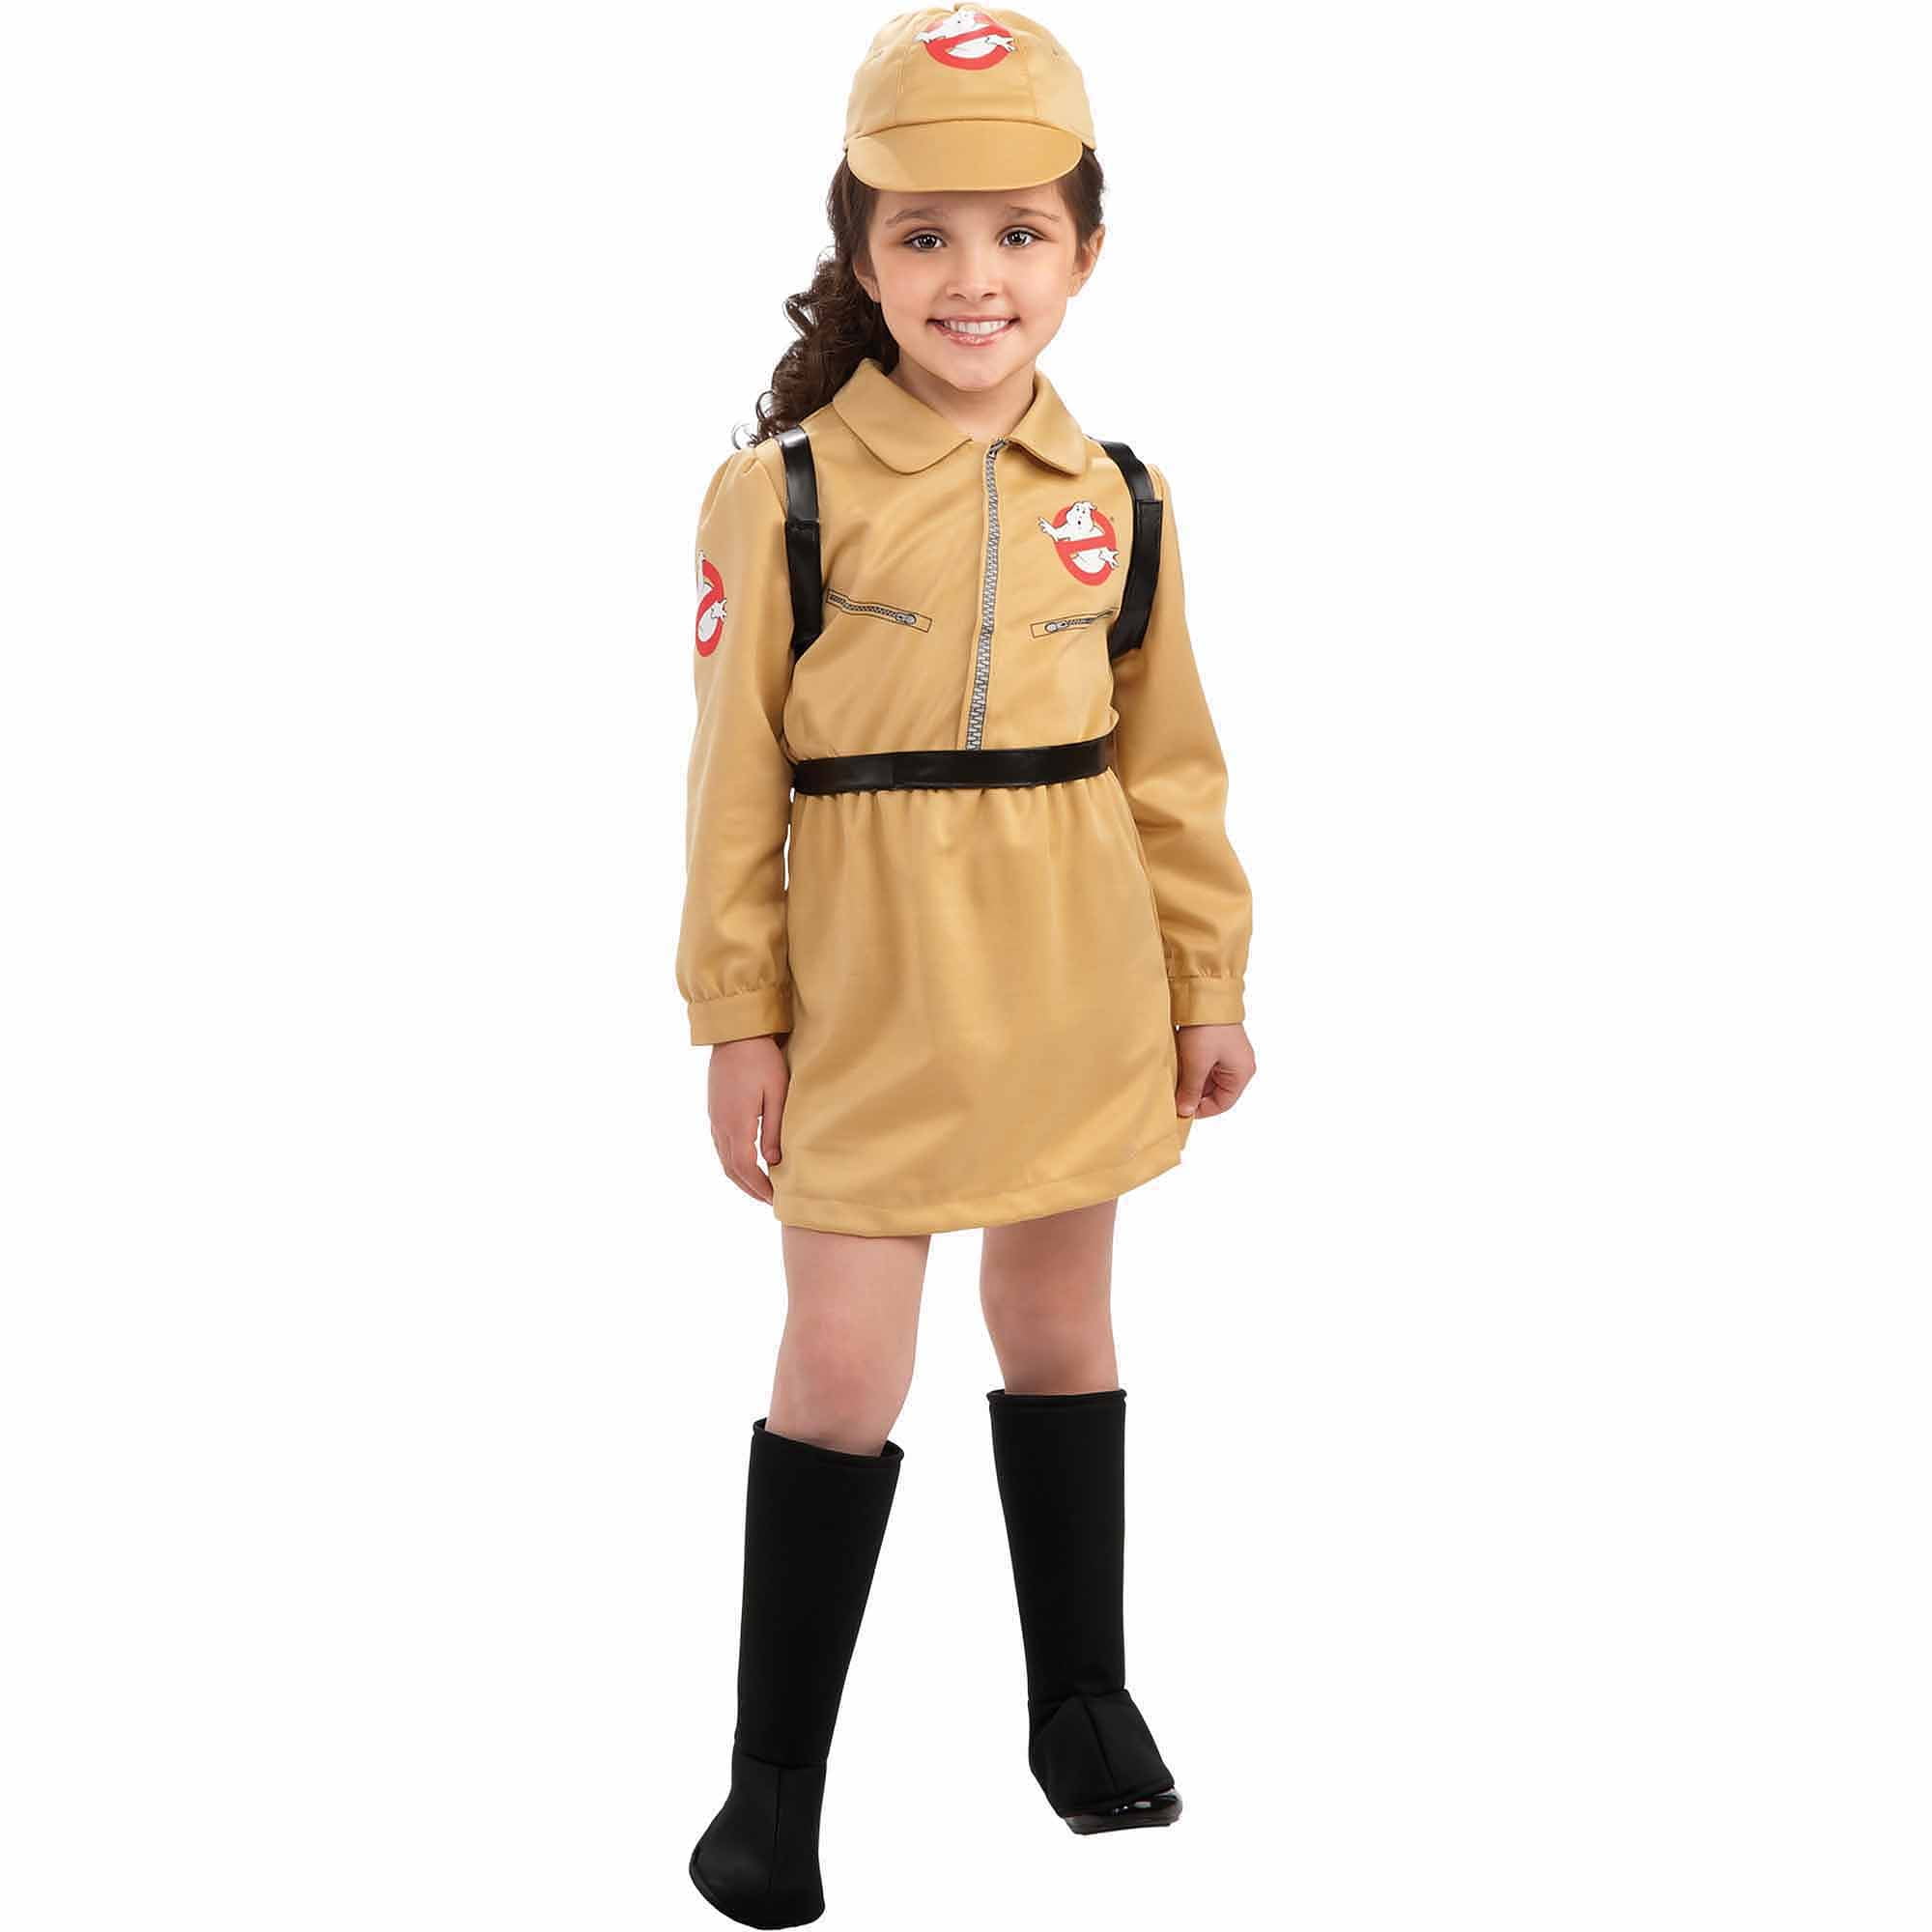 Family Adult Ladies Mens Kids Boy Girl Ghostbusters Halloween Costume S M L XL 